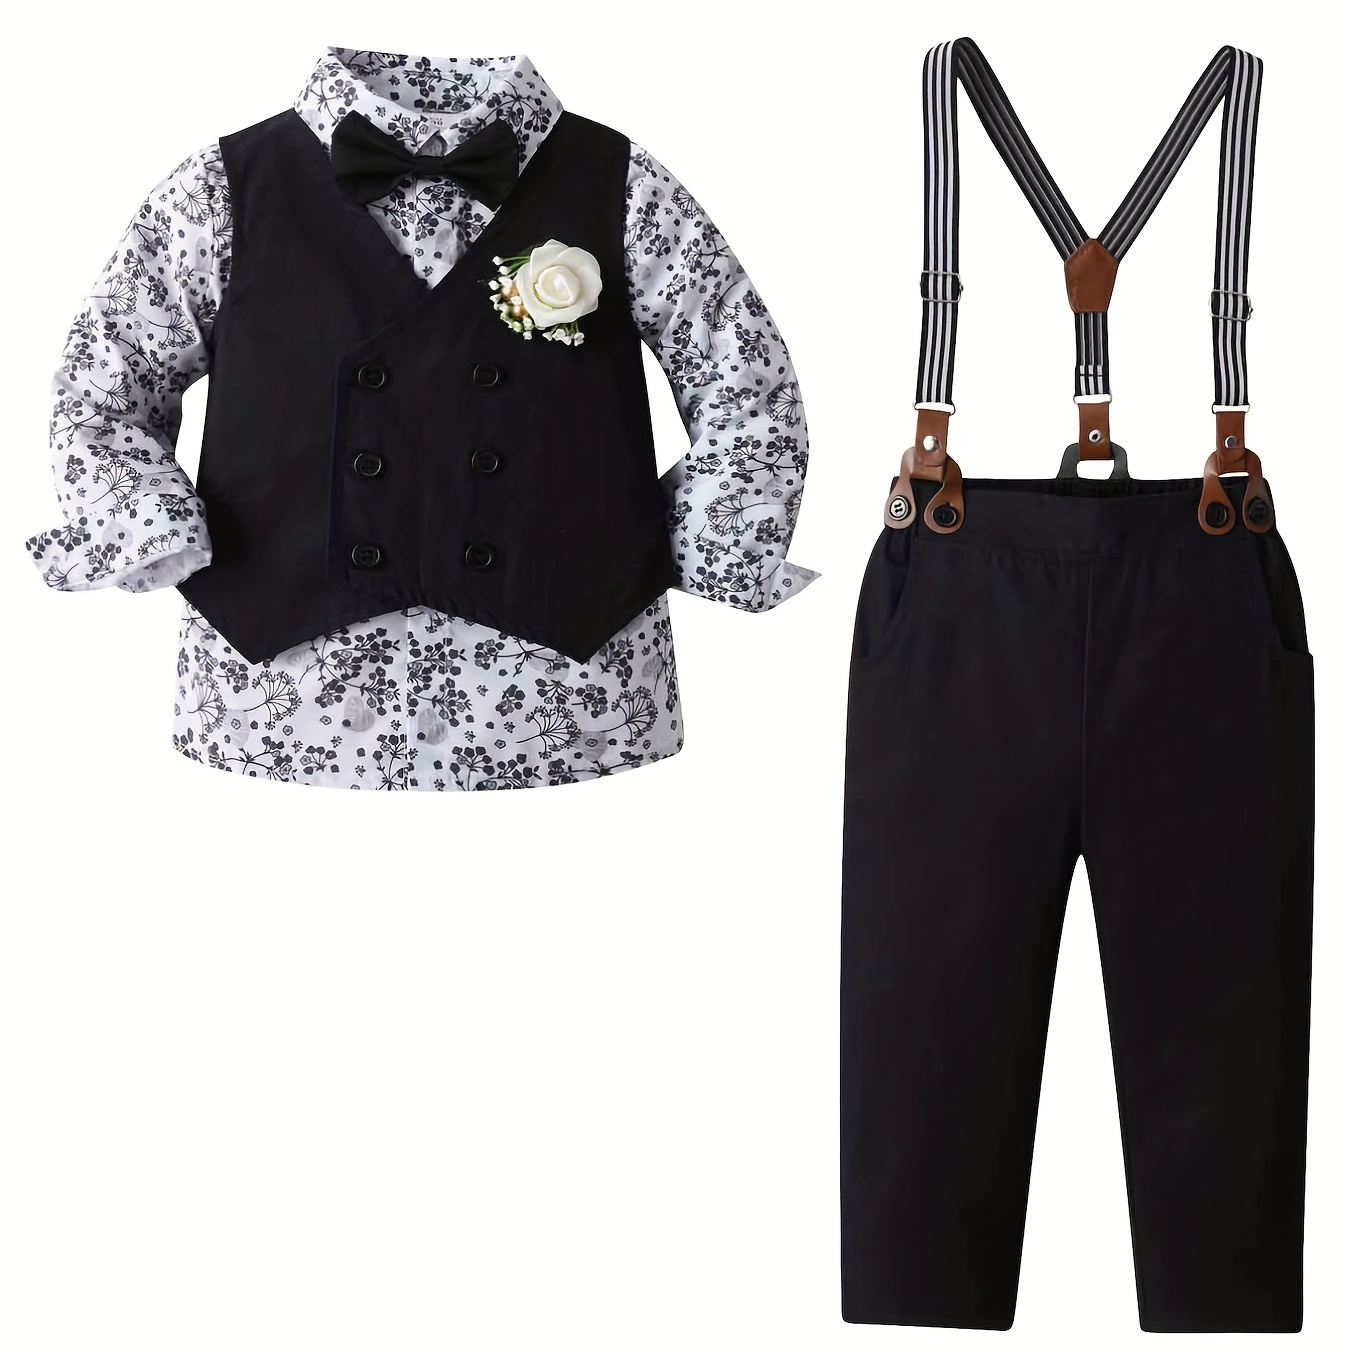 

Boys 3-piece Fashion Suit Set, Printed Long Sleeve Shirt With Bowtie, Black Vest, And Suspenders Pants, Floral Gentleman Outfit With Lapel Pin For Party Banquet